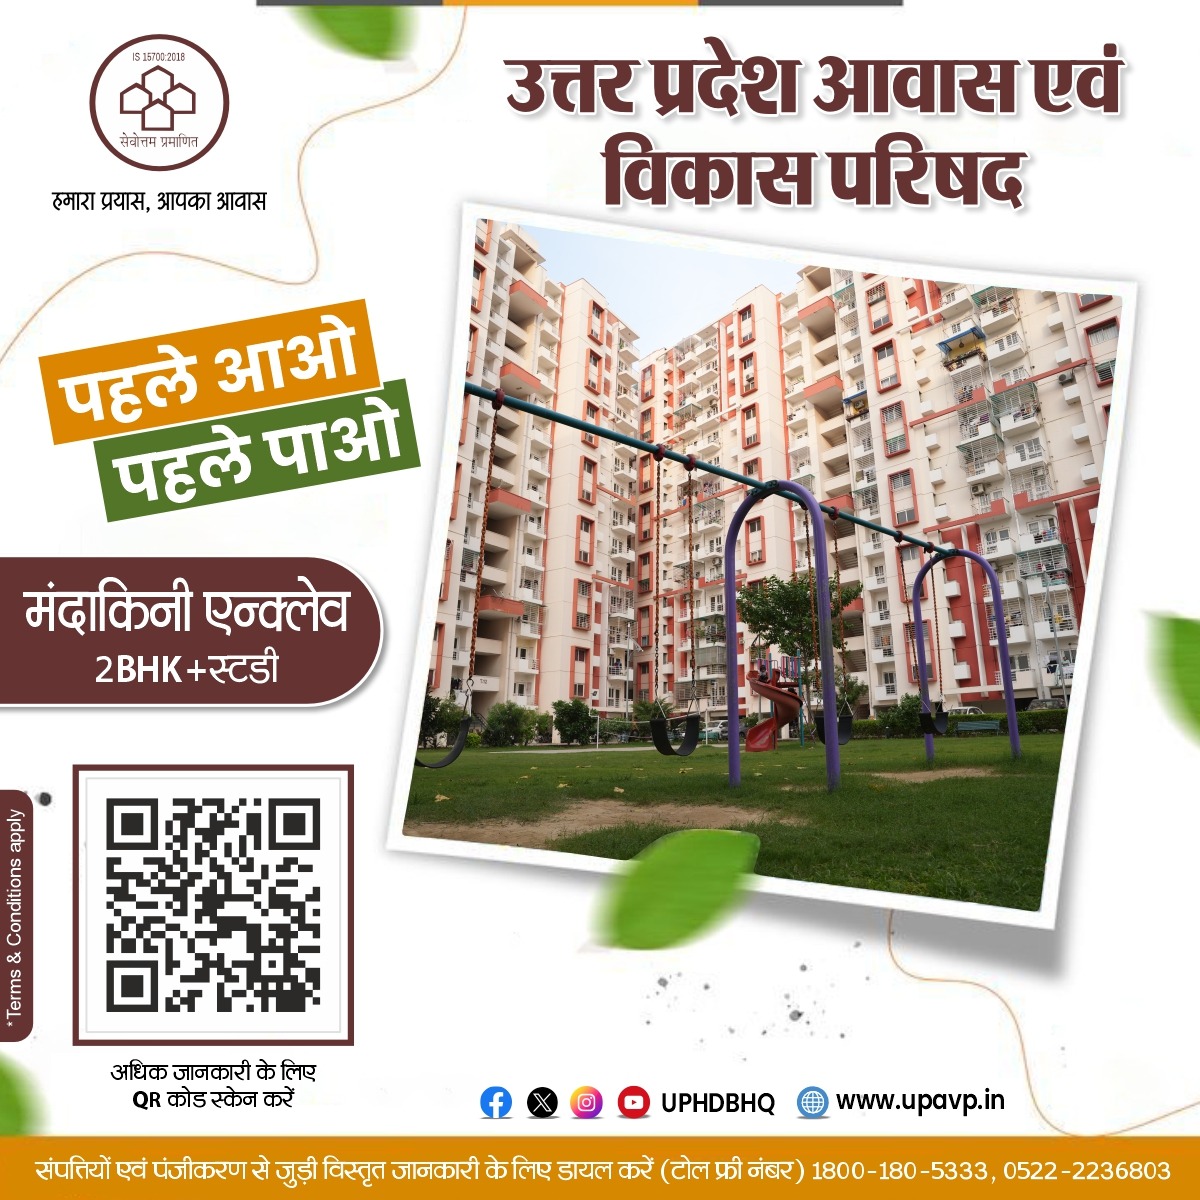 First Come First Serve flats in the Mandakini Enclave, Avadh Vihar Yojna, Lucknow

For more details visit upavp.in or dial (toll-free number) 1800-180-5333, 0522-2236803.  

#upavp #HousingForAll #AwasVikasUP #FCFS #Lucknow #Avadhviharyojana